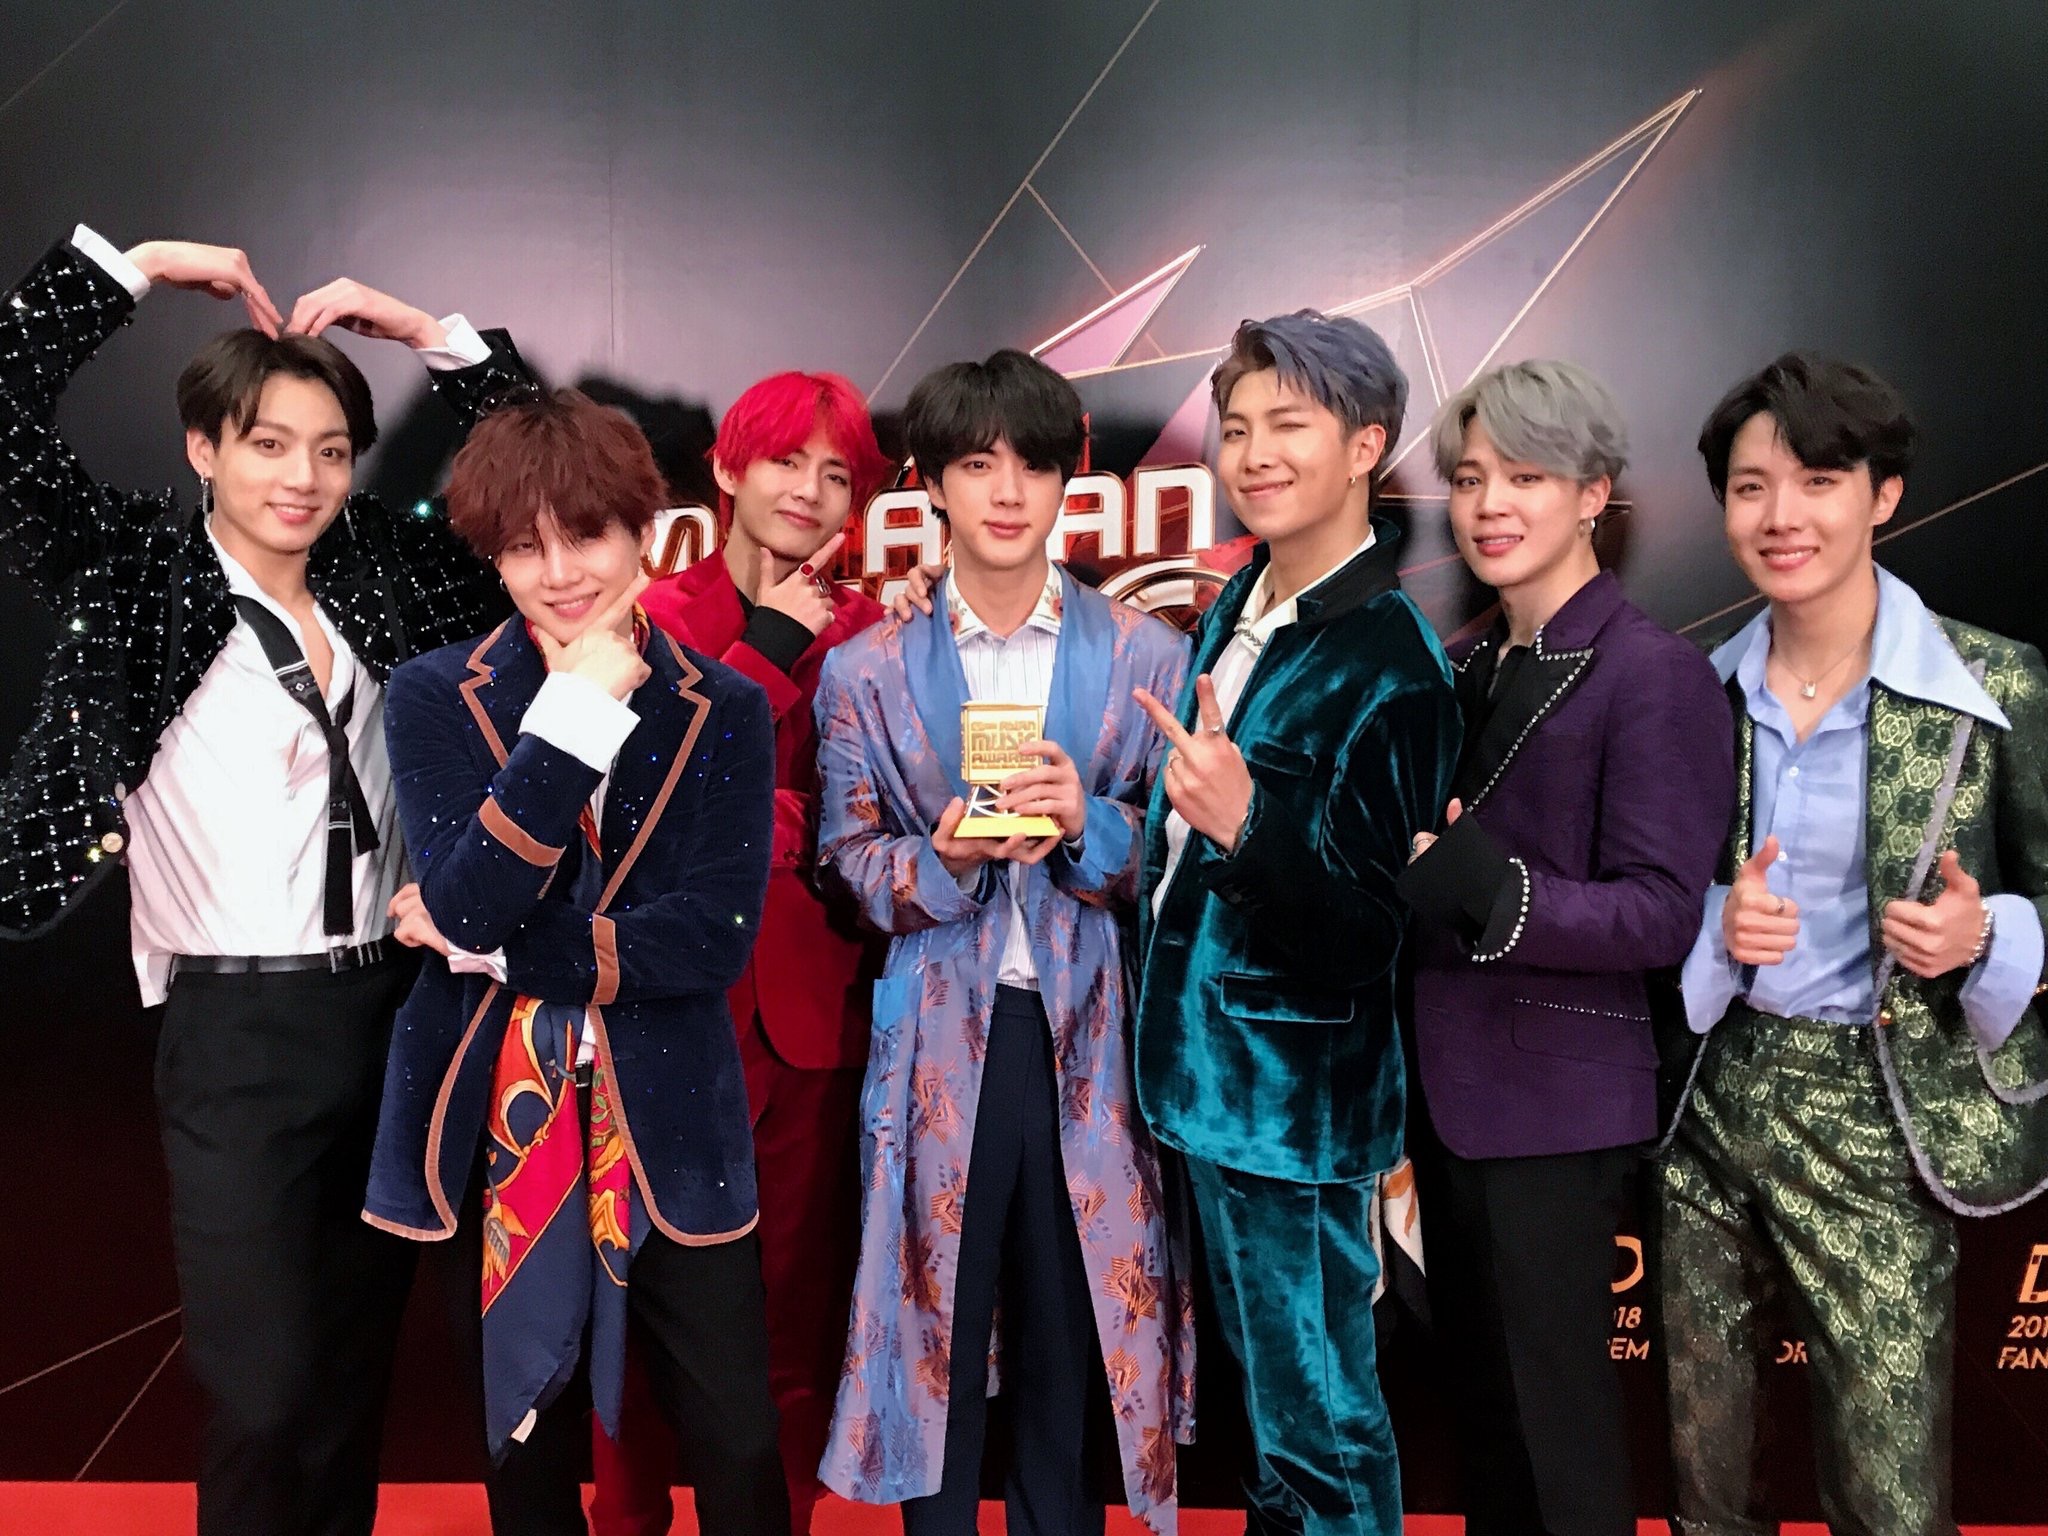 BTS at the Mnet Asian Music Awards in 2018